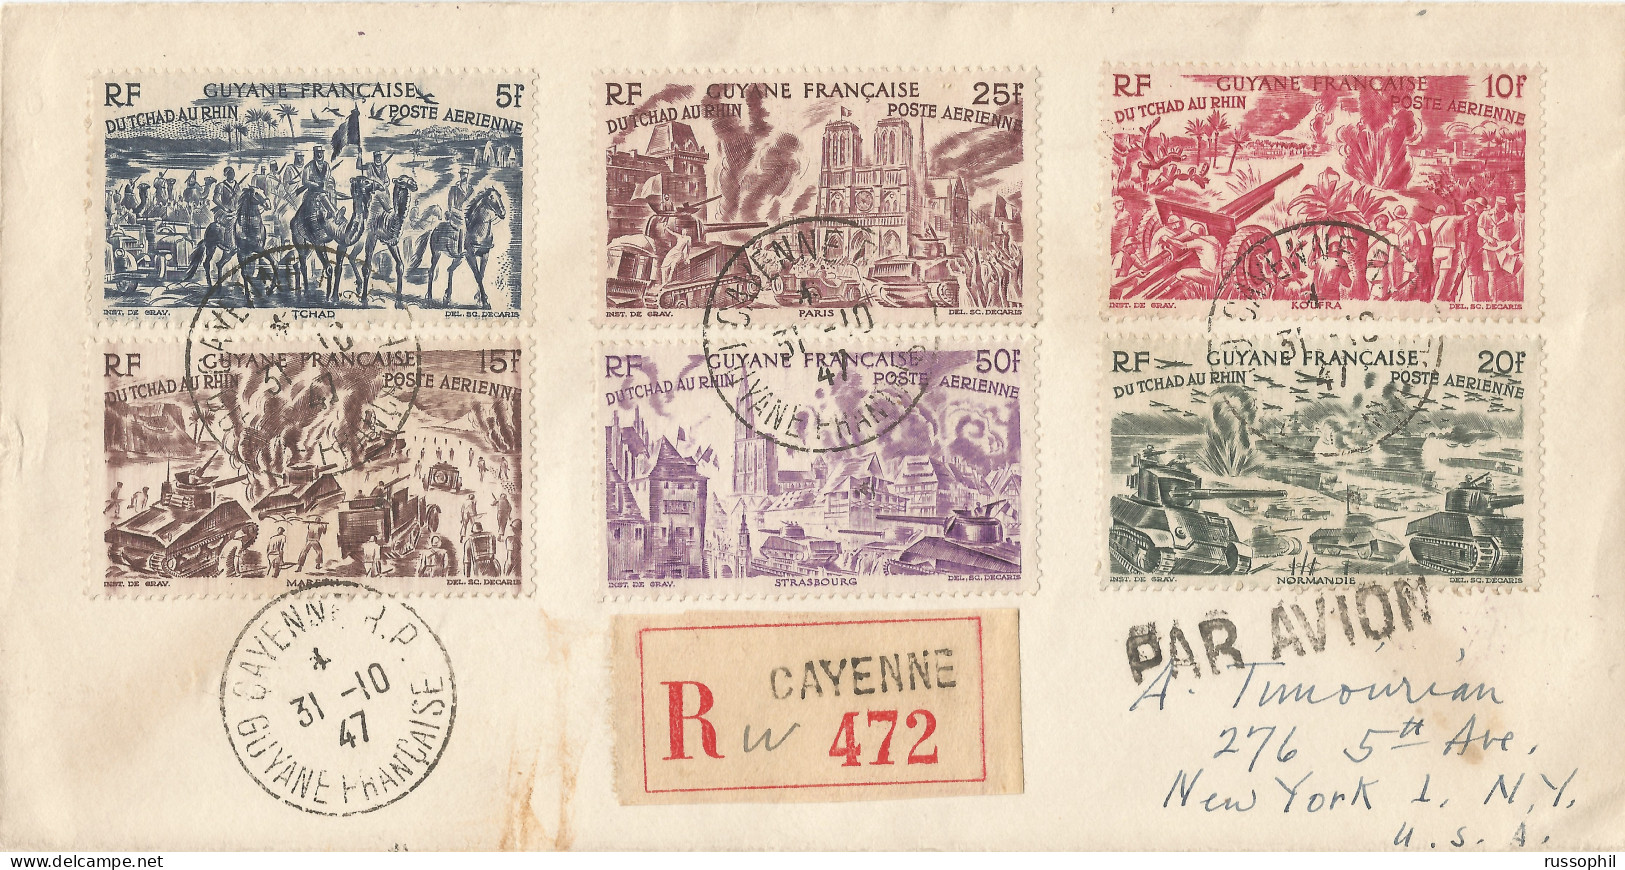 GUYANE - 6 STAMPS 125 FR.  FRANKING ON AIR MAILED REGISTERED COVER FROM CAYENNE TO THE USA - 1947 - Covers & Documents